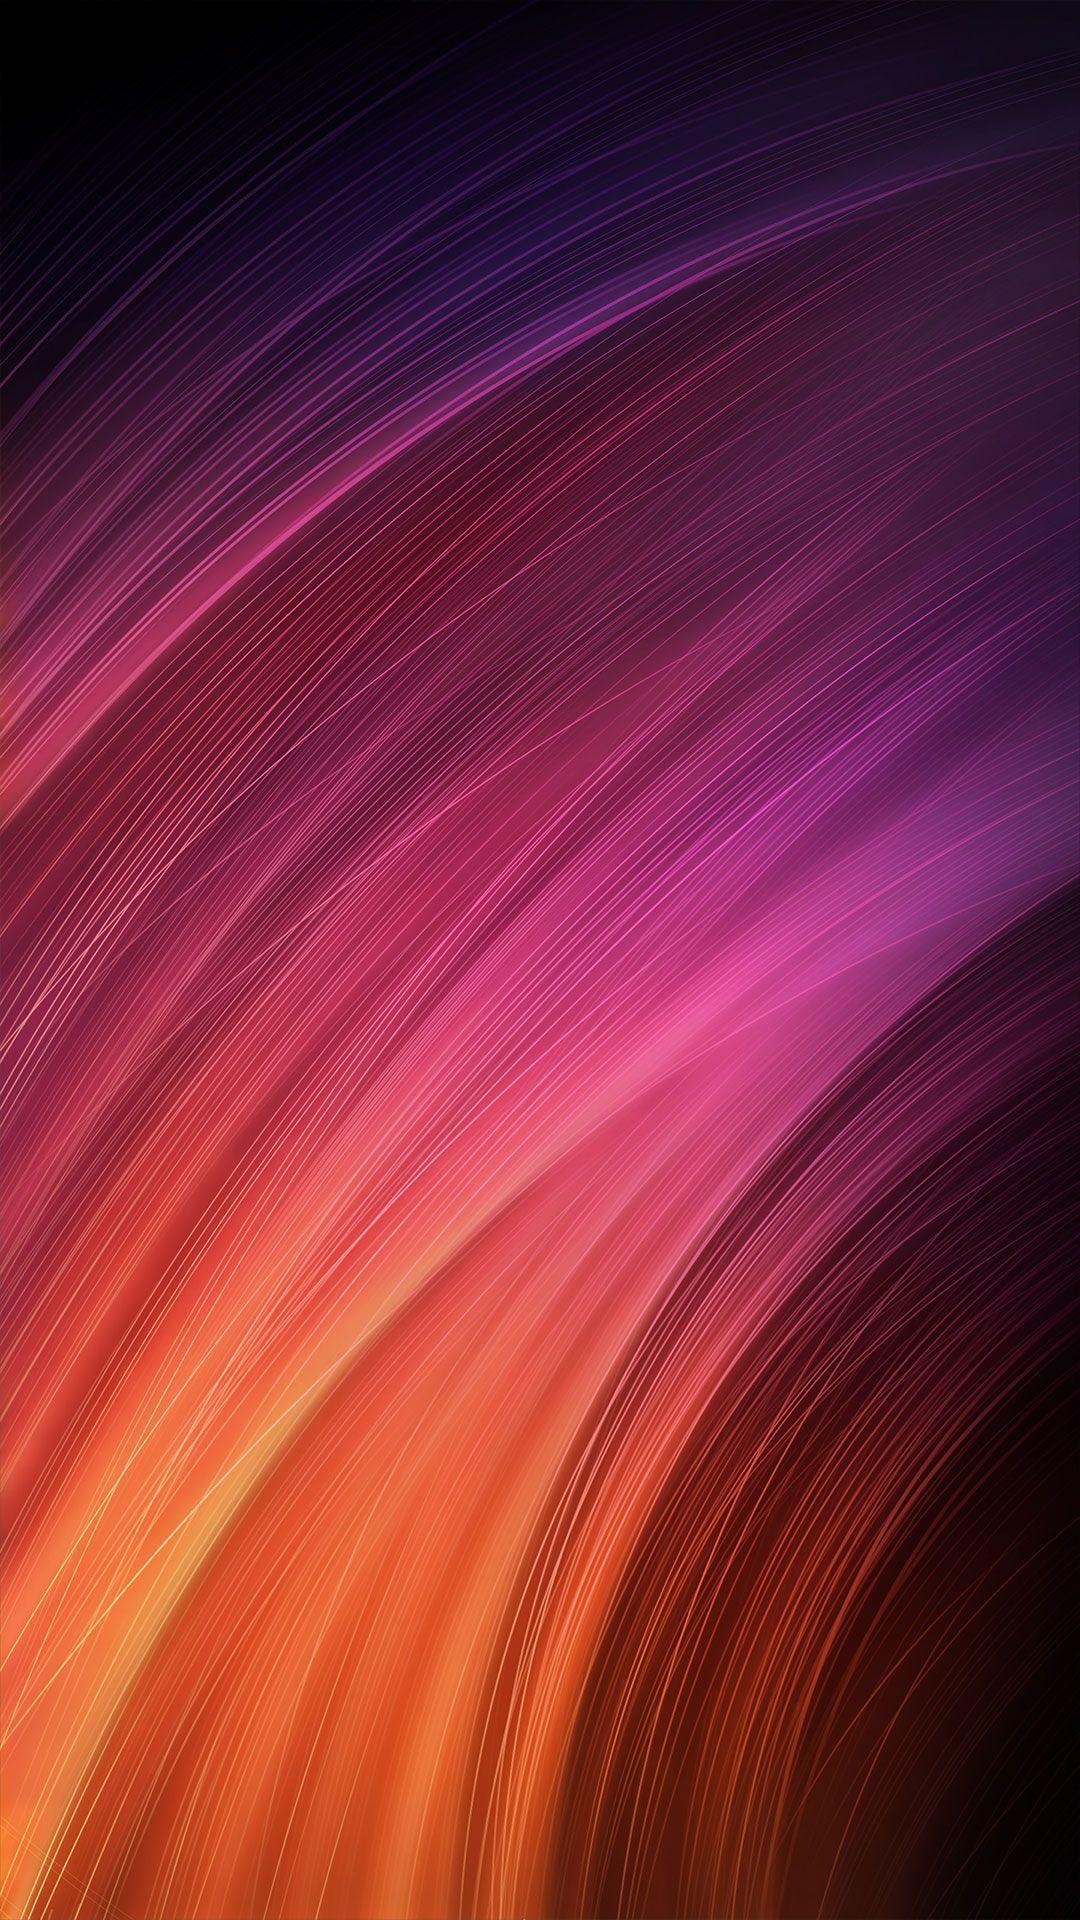 Redmi Note 4 Stock Wallpapers Collection, Download - Redmi Note 4 Wallpaper  Hd - 1080x1920 Wallpaper 